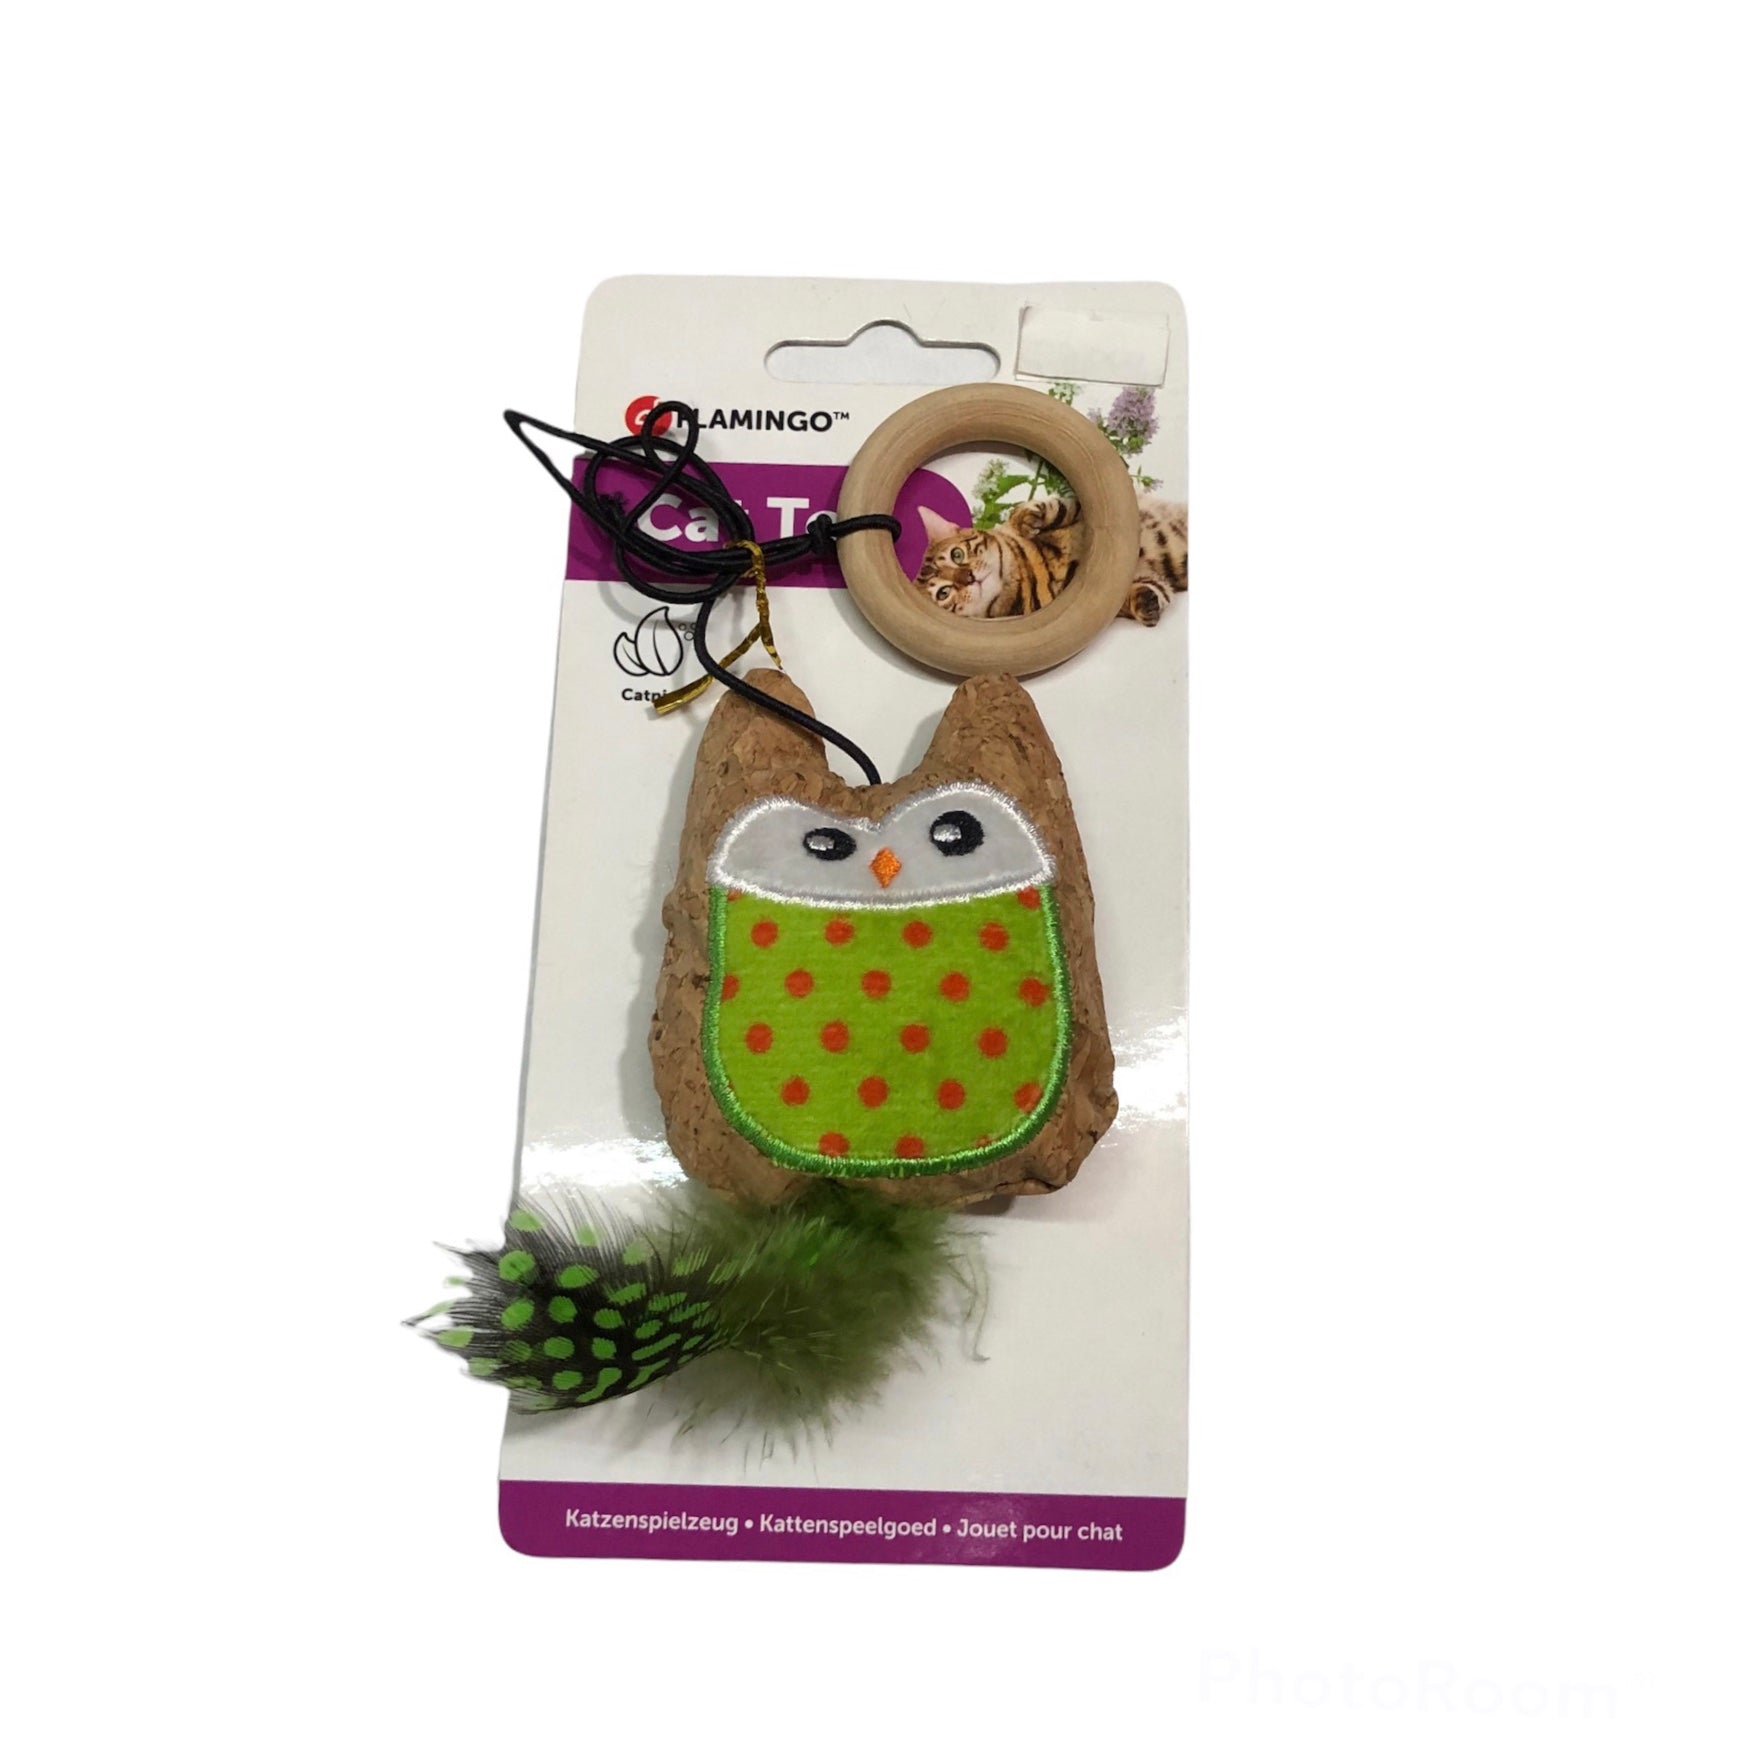 Spring-loaded owl cat toy